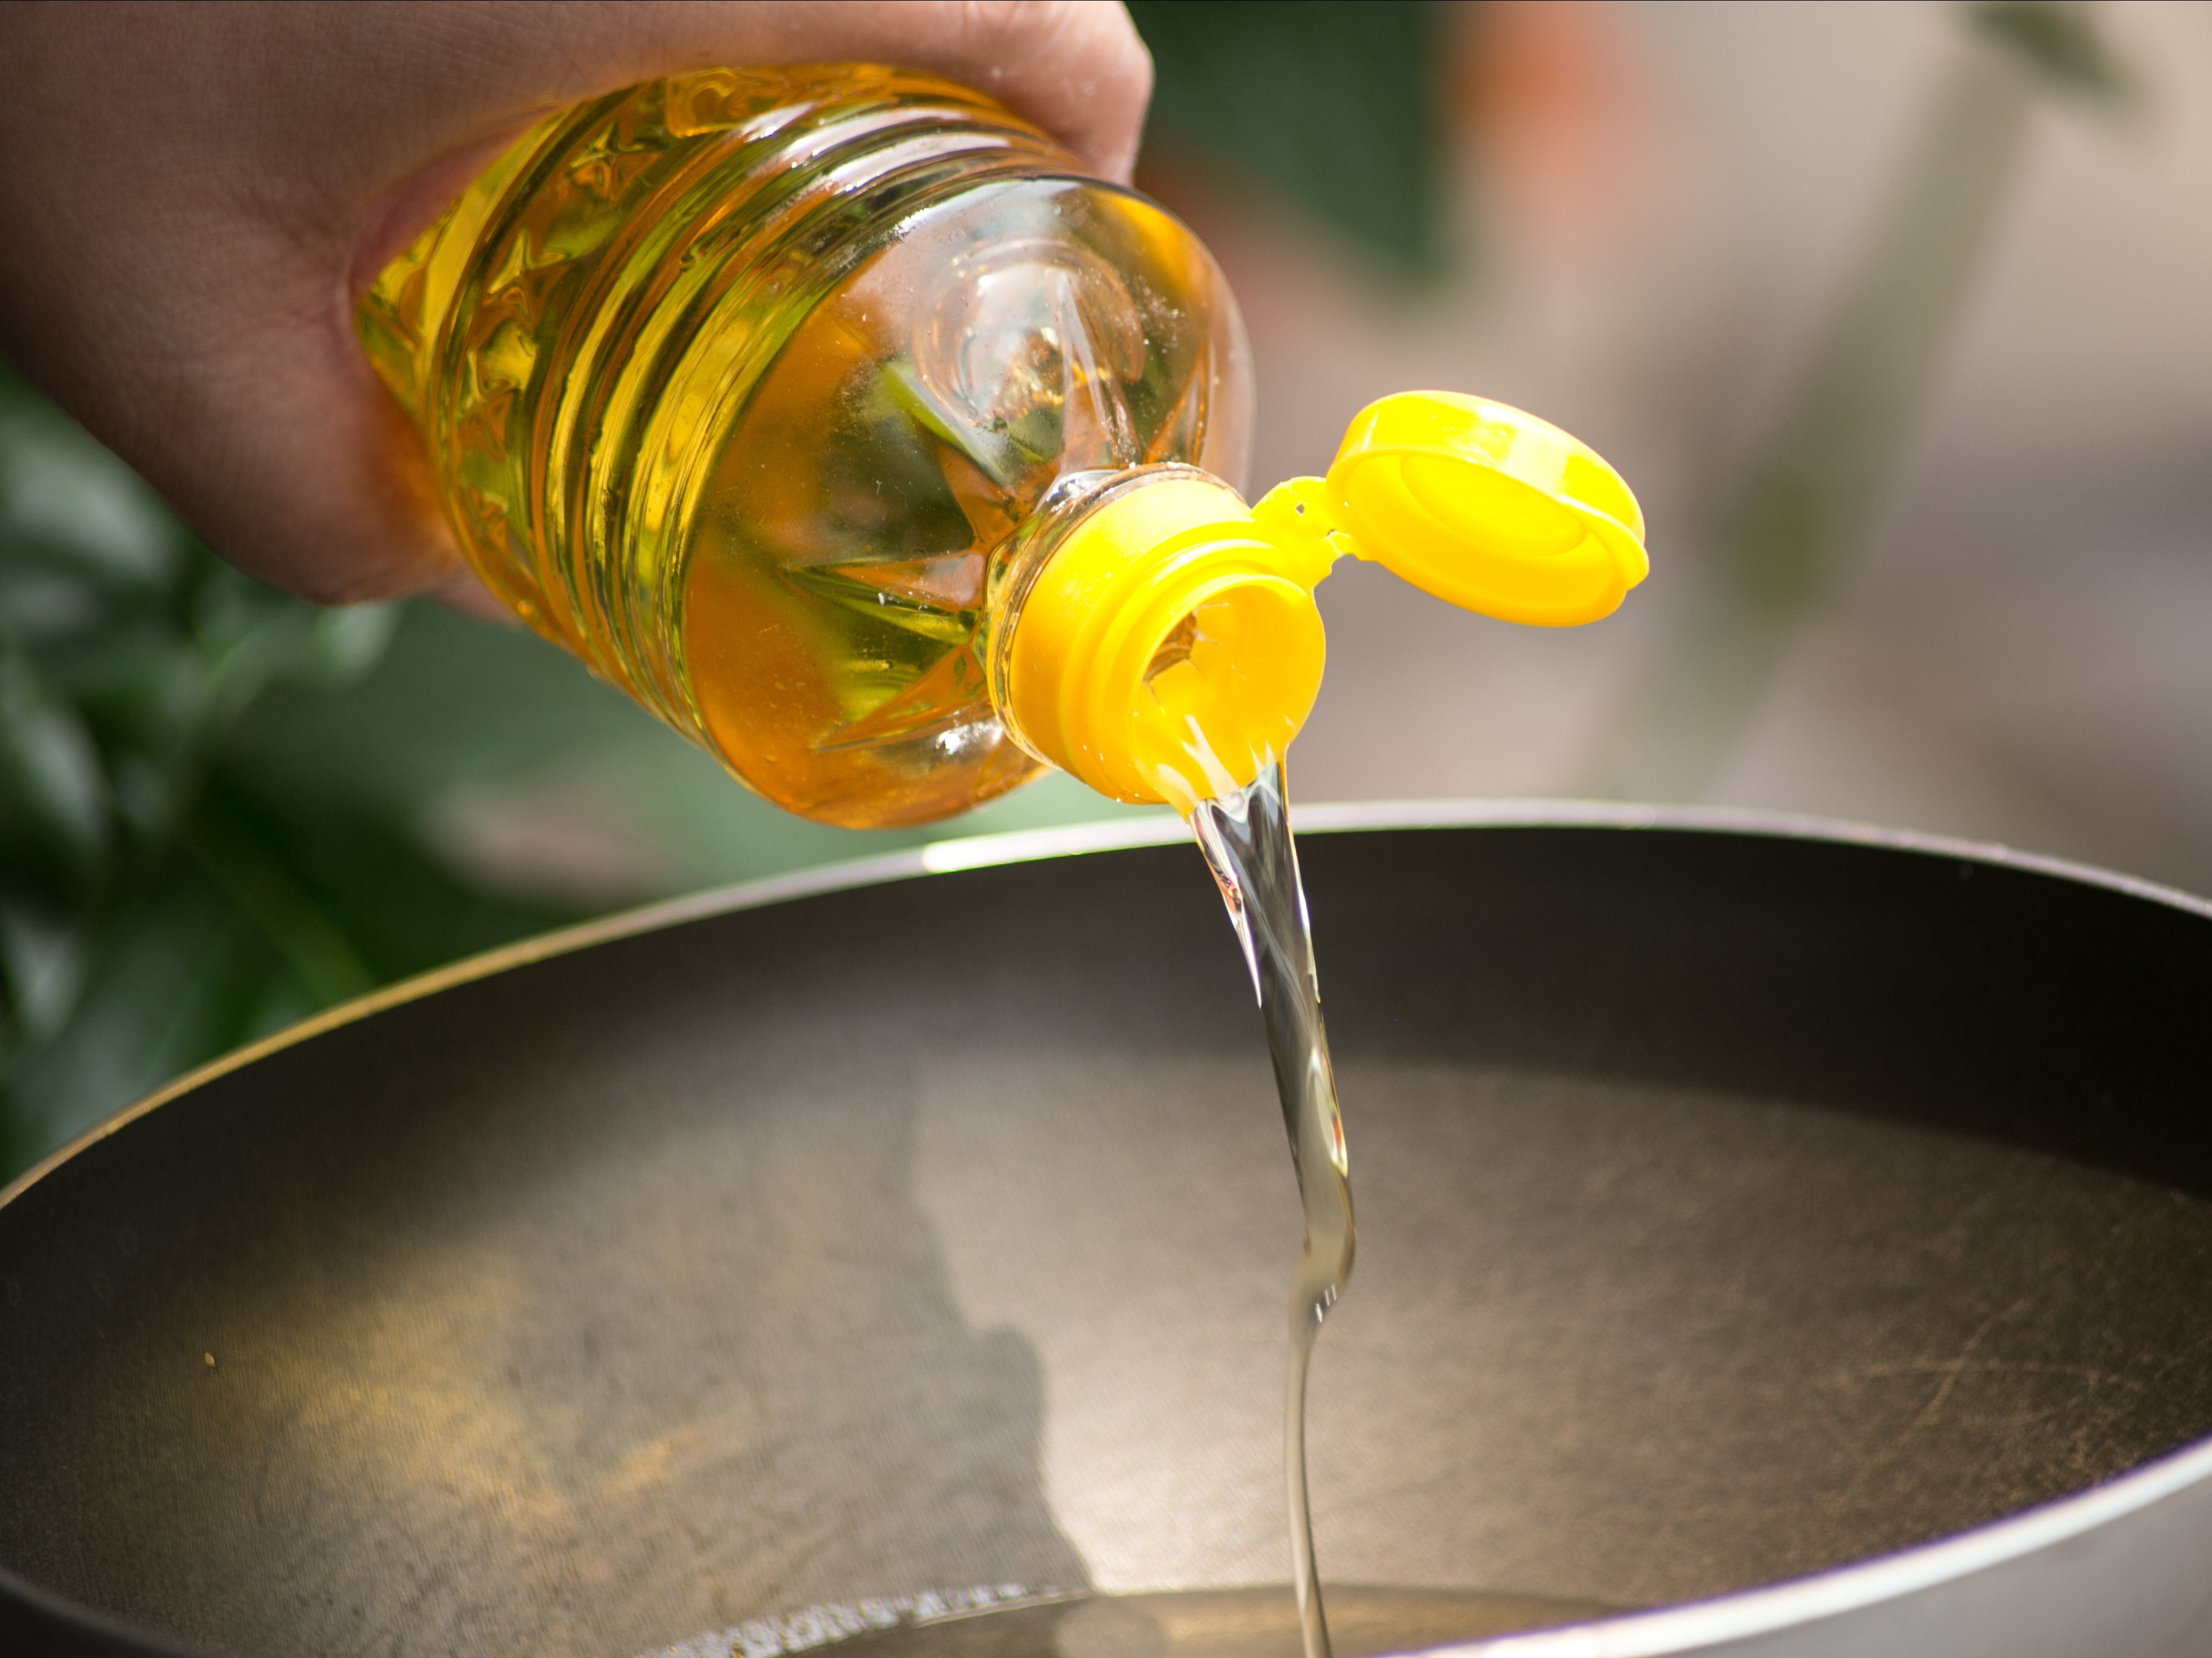 Ukraine is the largest exporter of sunflower oil in the world